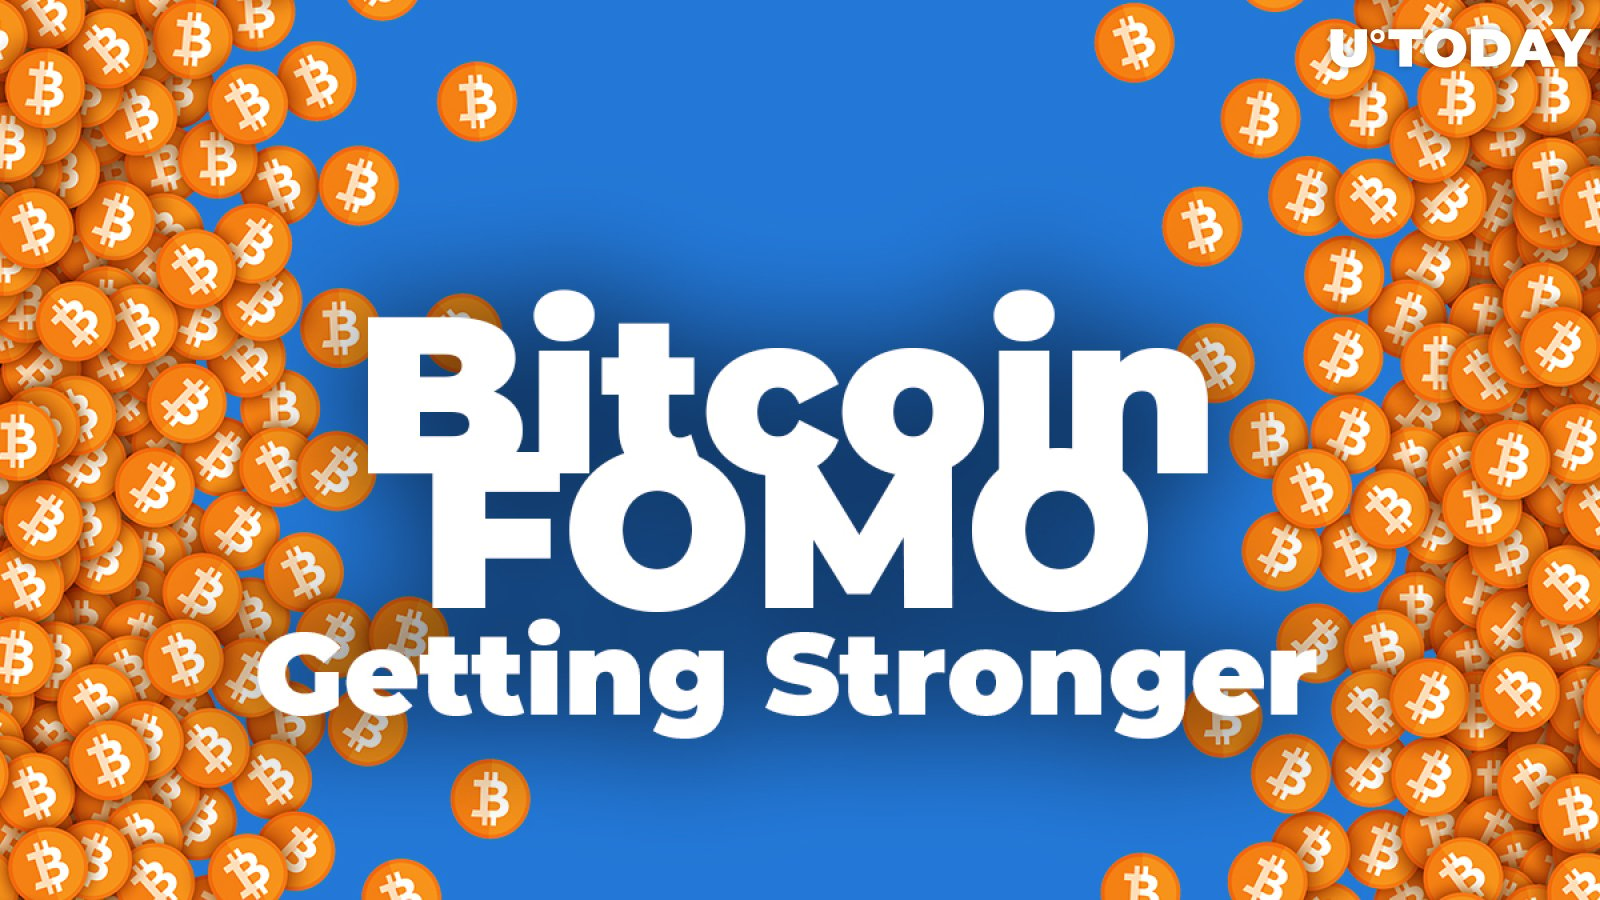 Peter Brandt: Bitcoin FOMO Getting Stronger, It Is Time to Fix Some Profits